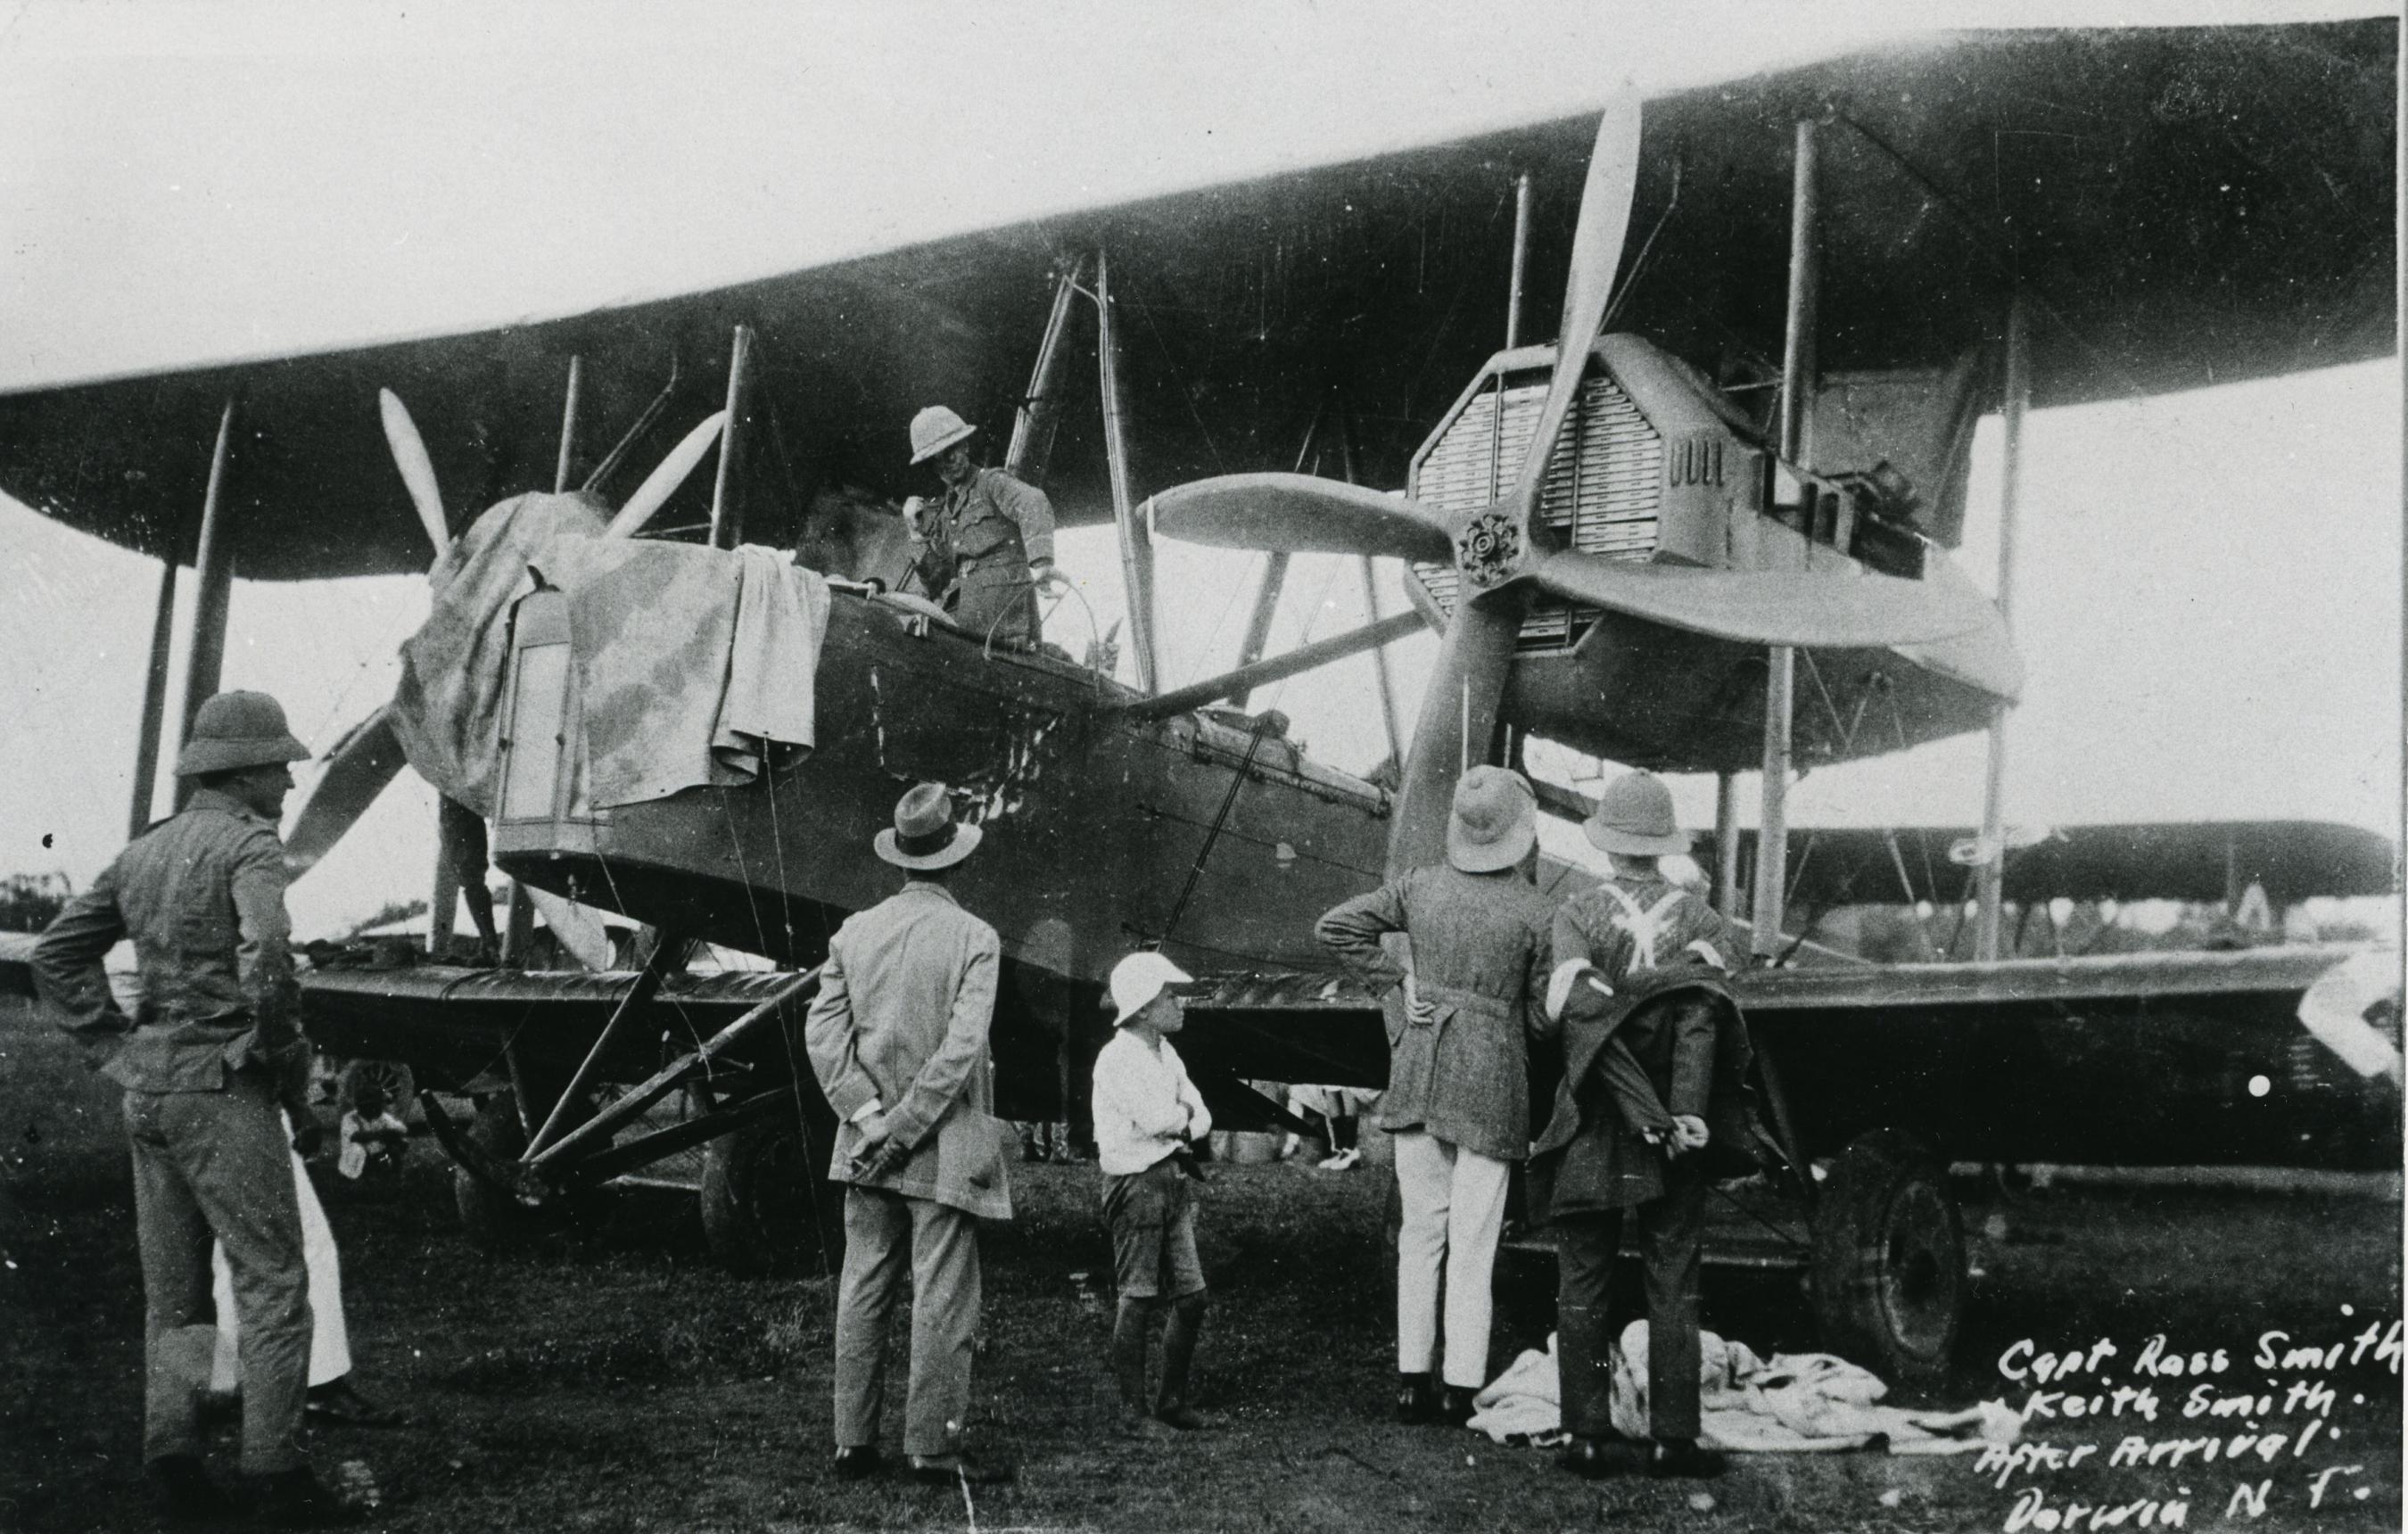 Group of people inspecting a plane on the ground